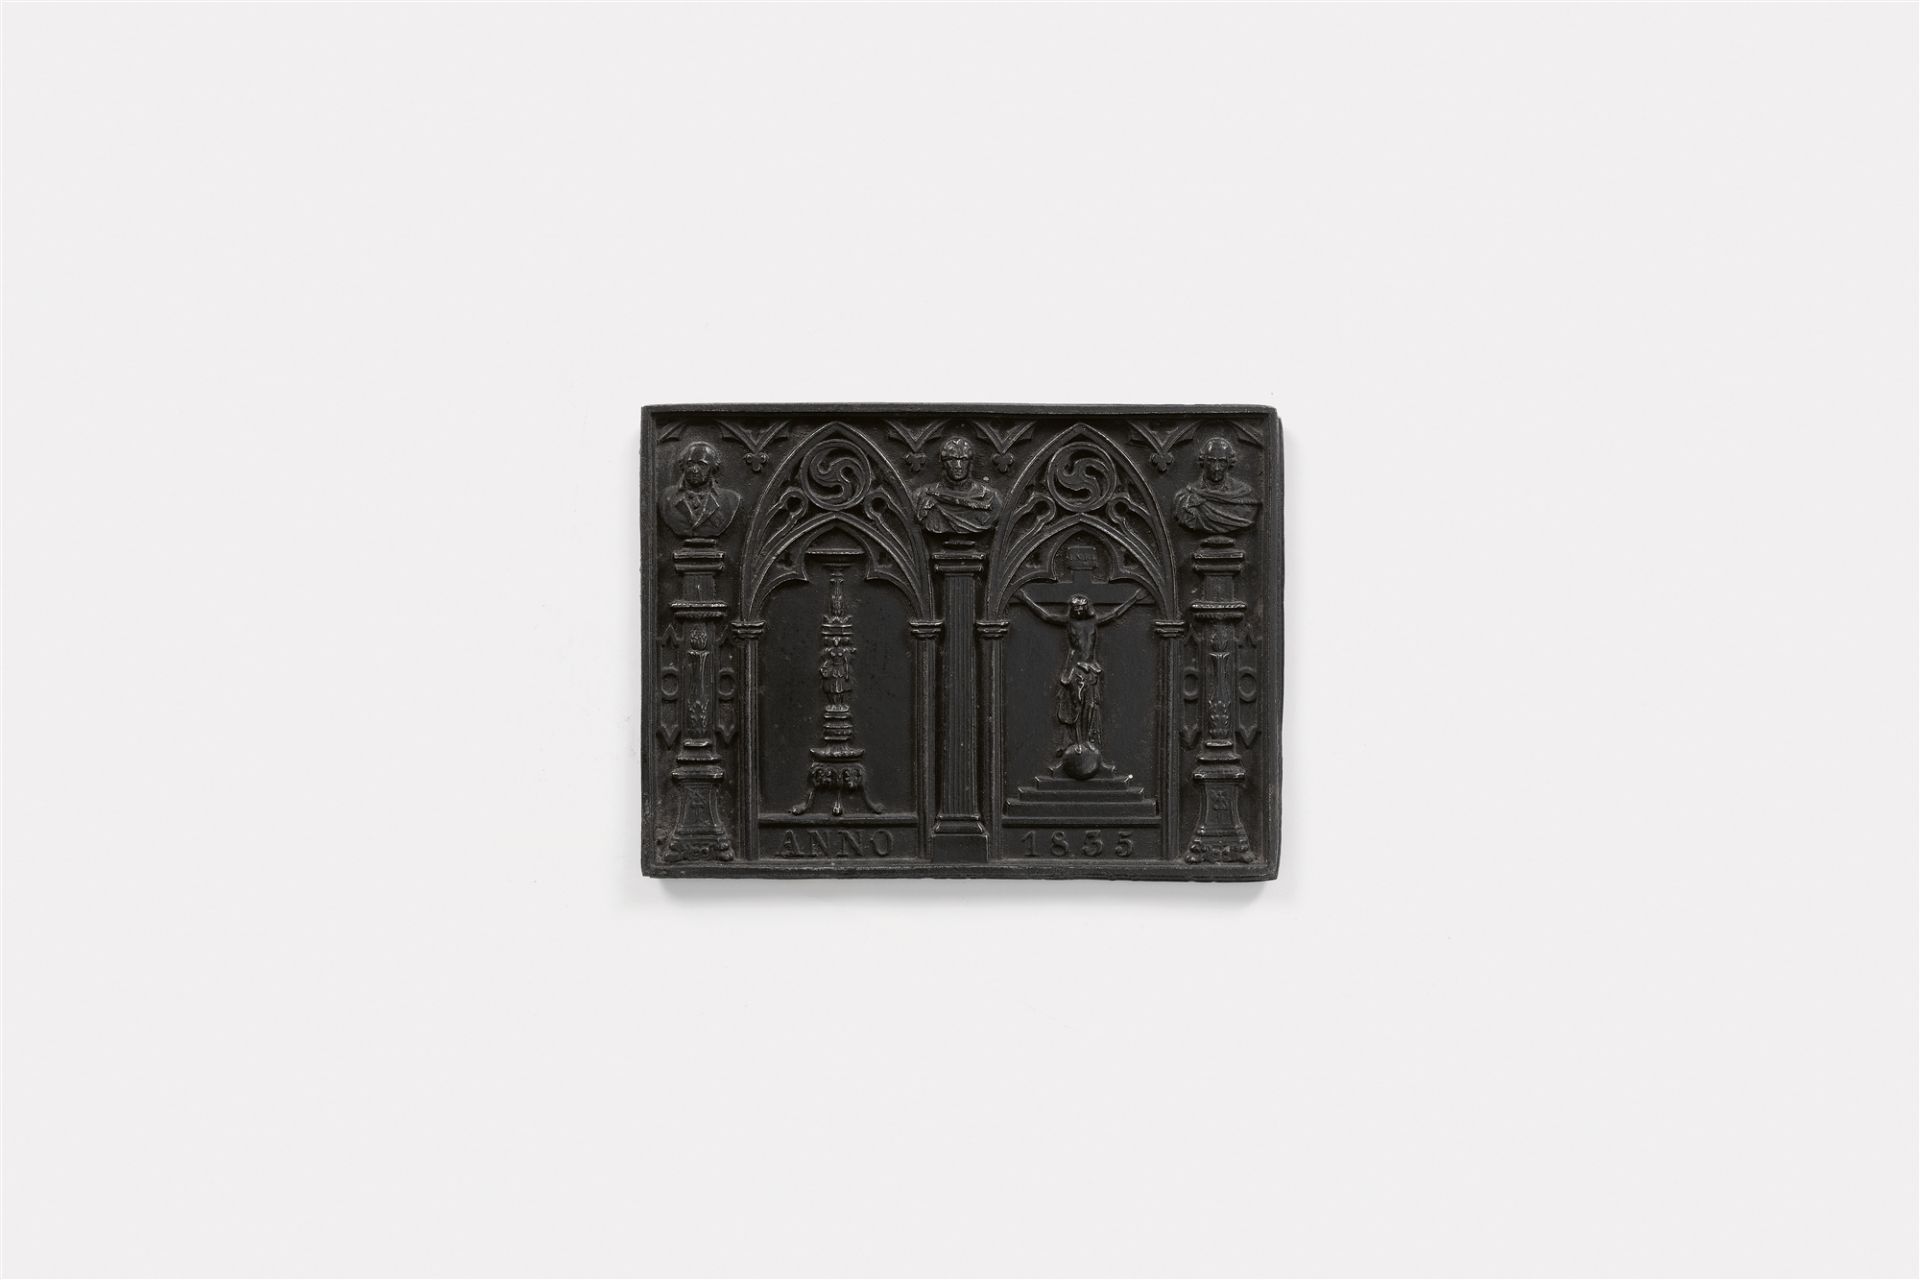 A cast iron New Year's plaque inscribed "ANNO 1835"